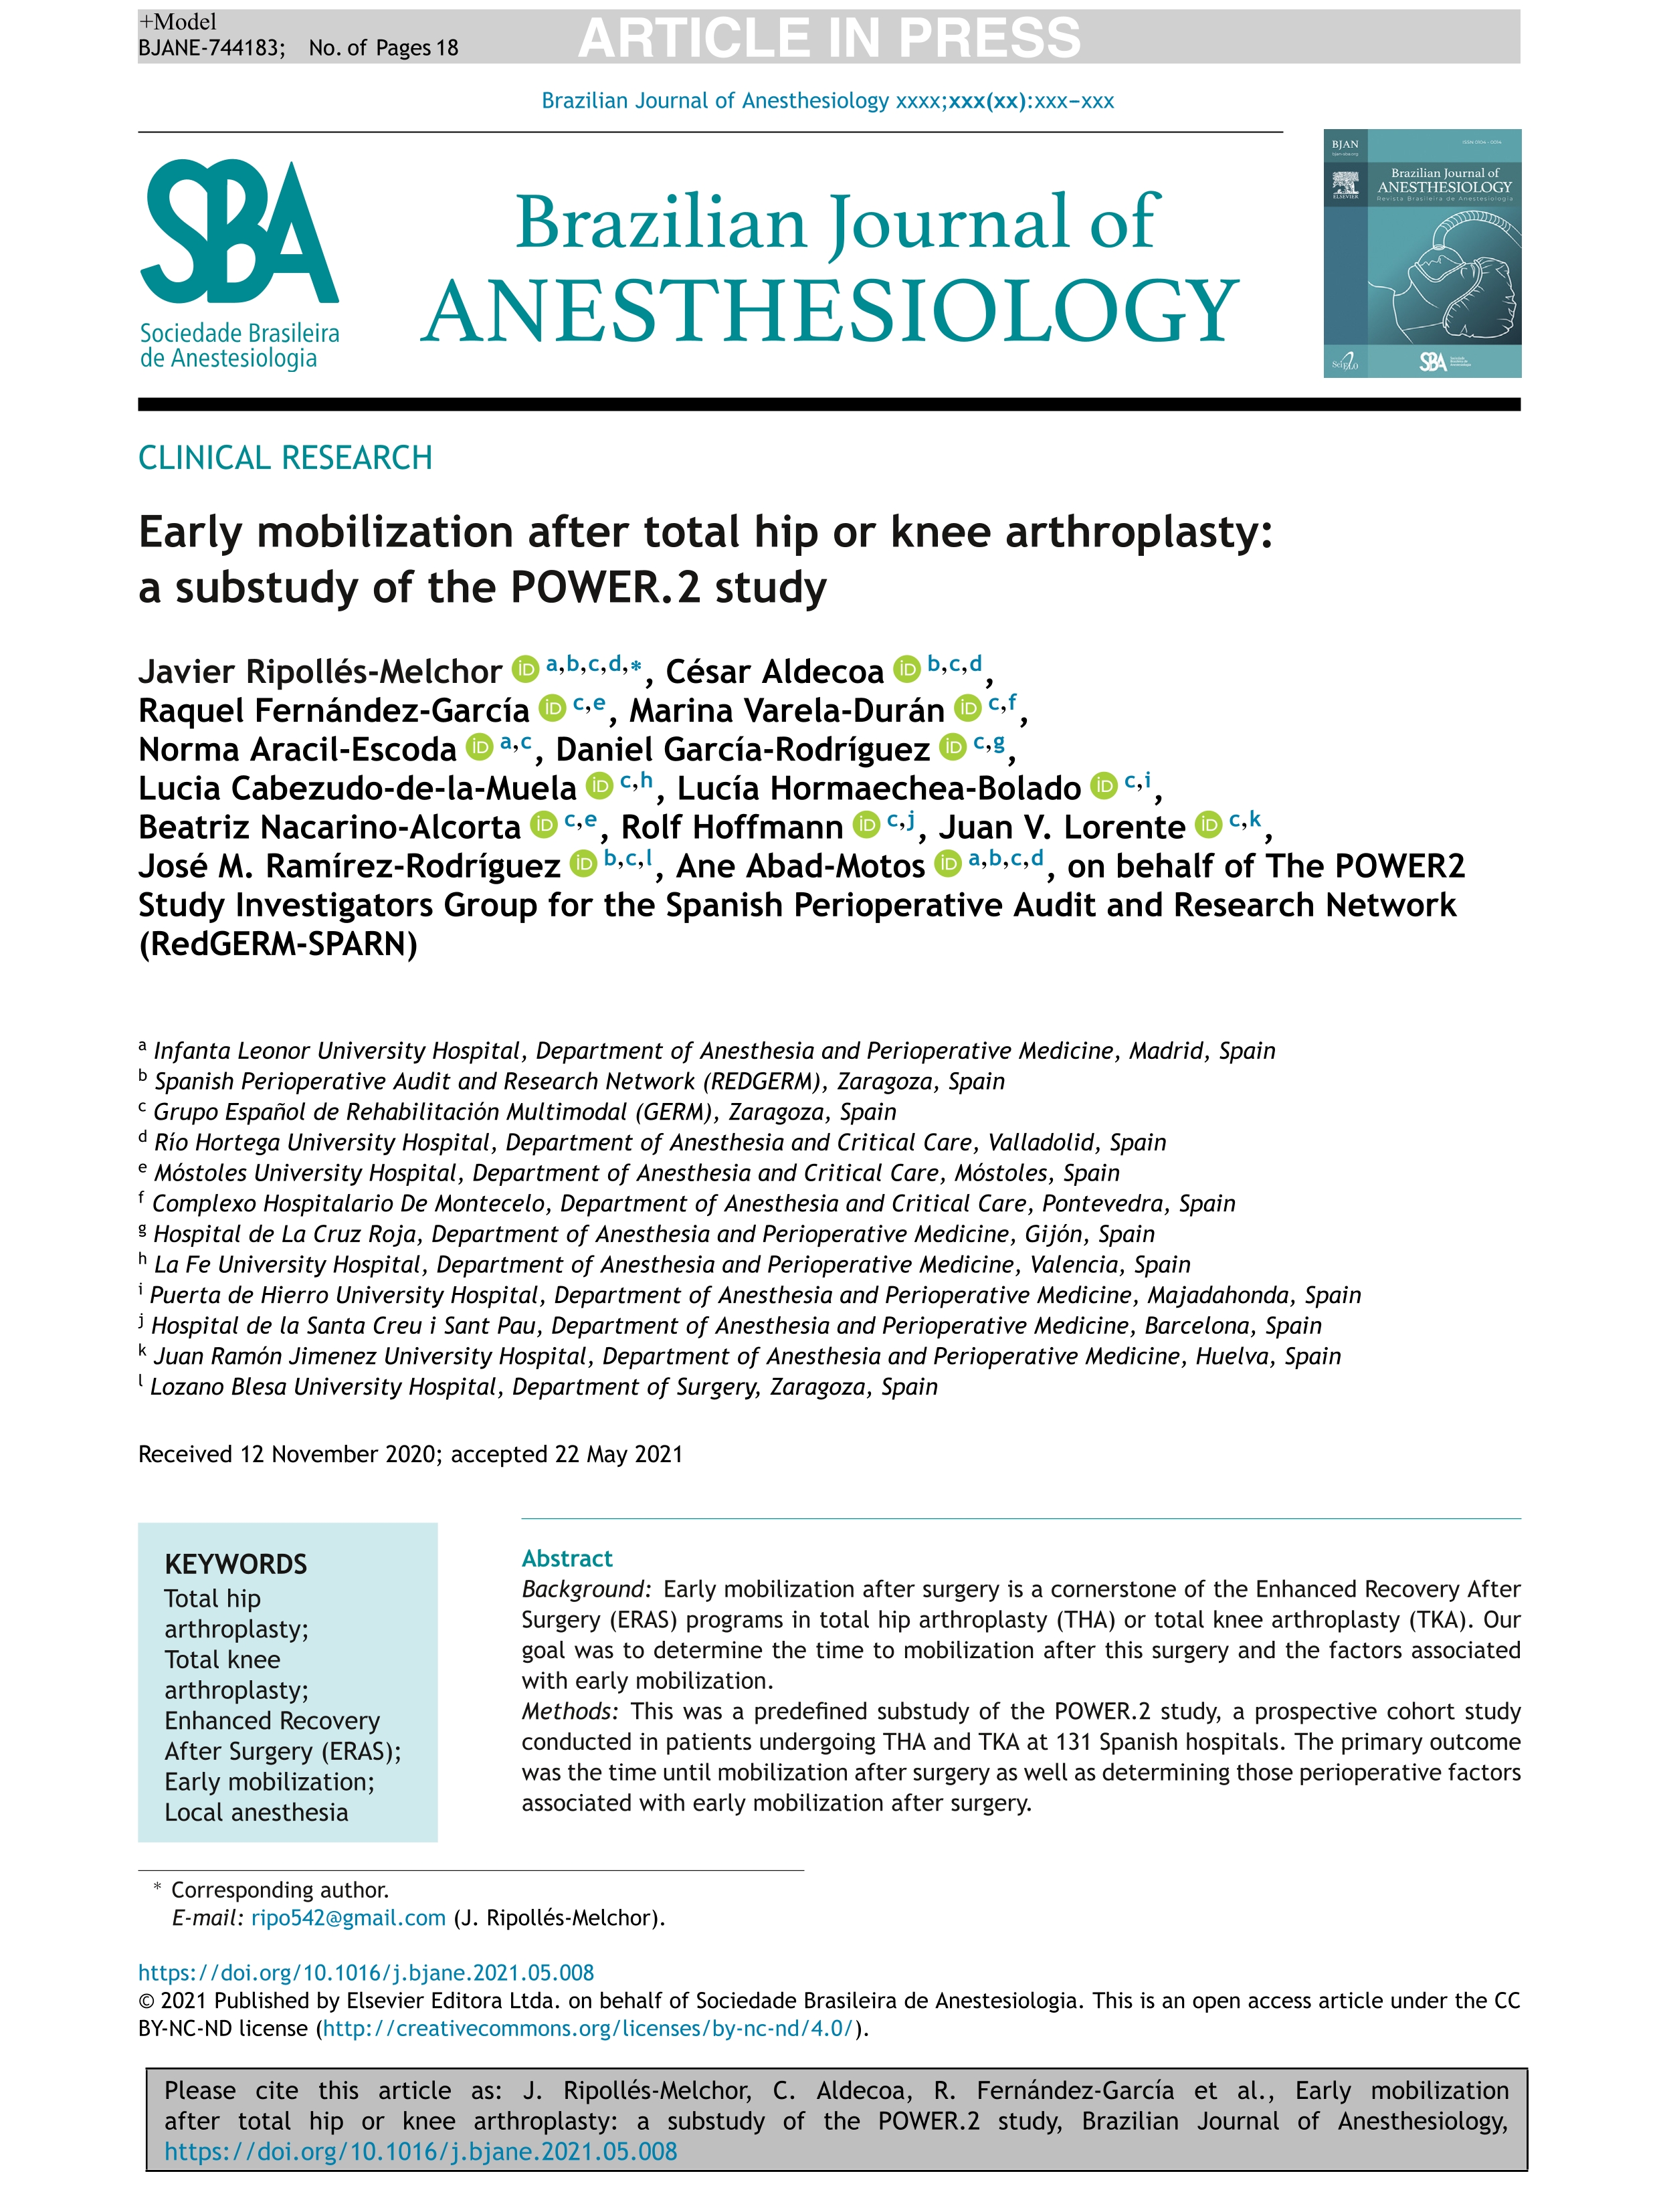 Early mobilization after total hip or knee arthroplasty: a substudy of the POWER.2 study